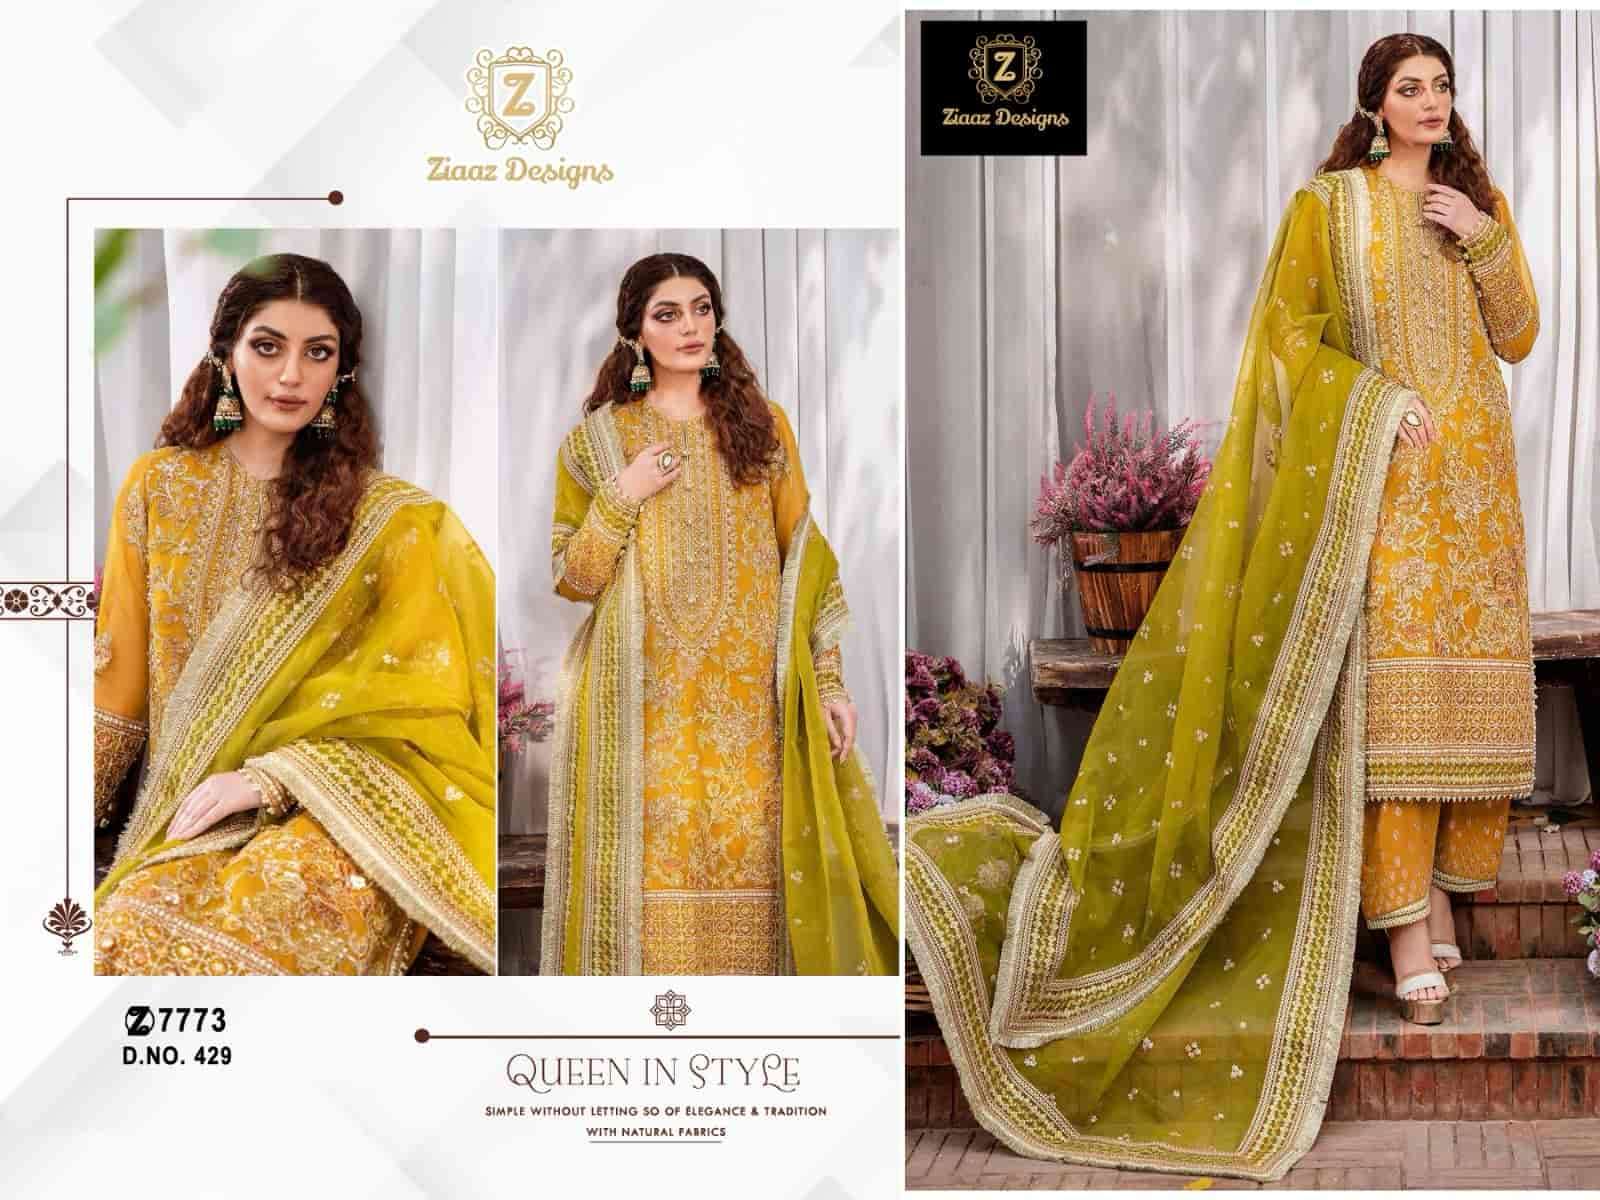 Ziaaz Designs 429 Festive Wear Style Heavy Designer Embroidered Dress Collection